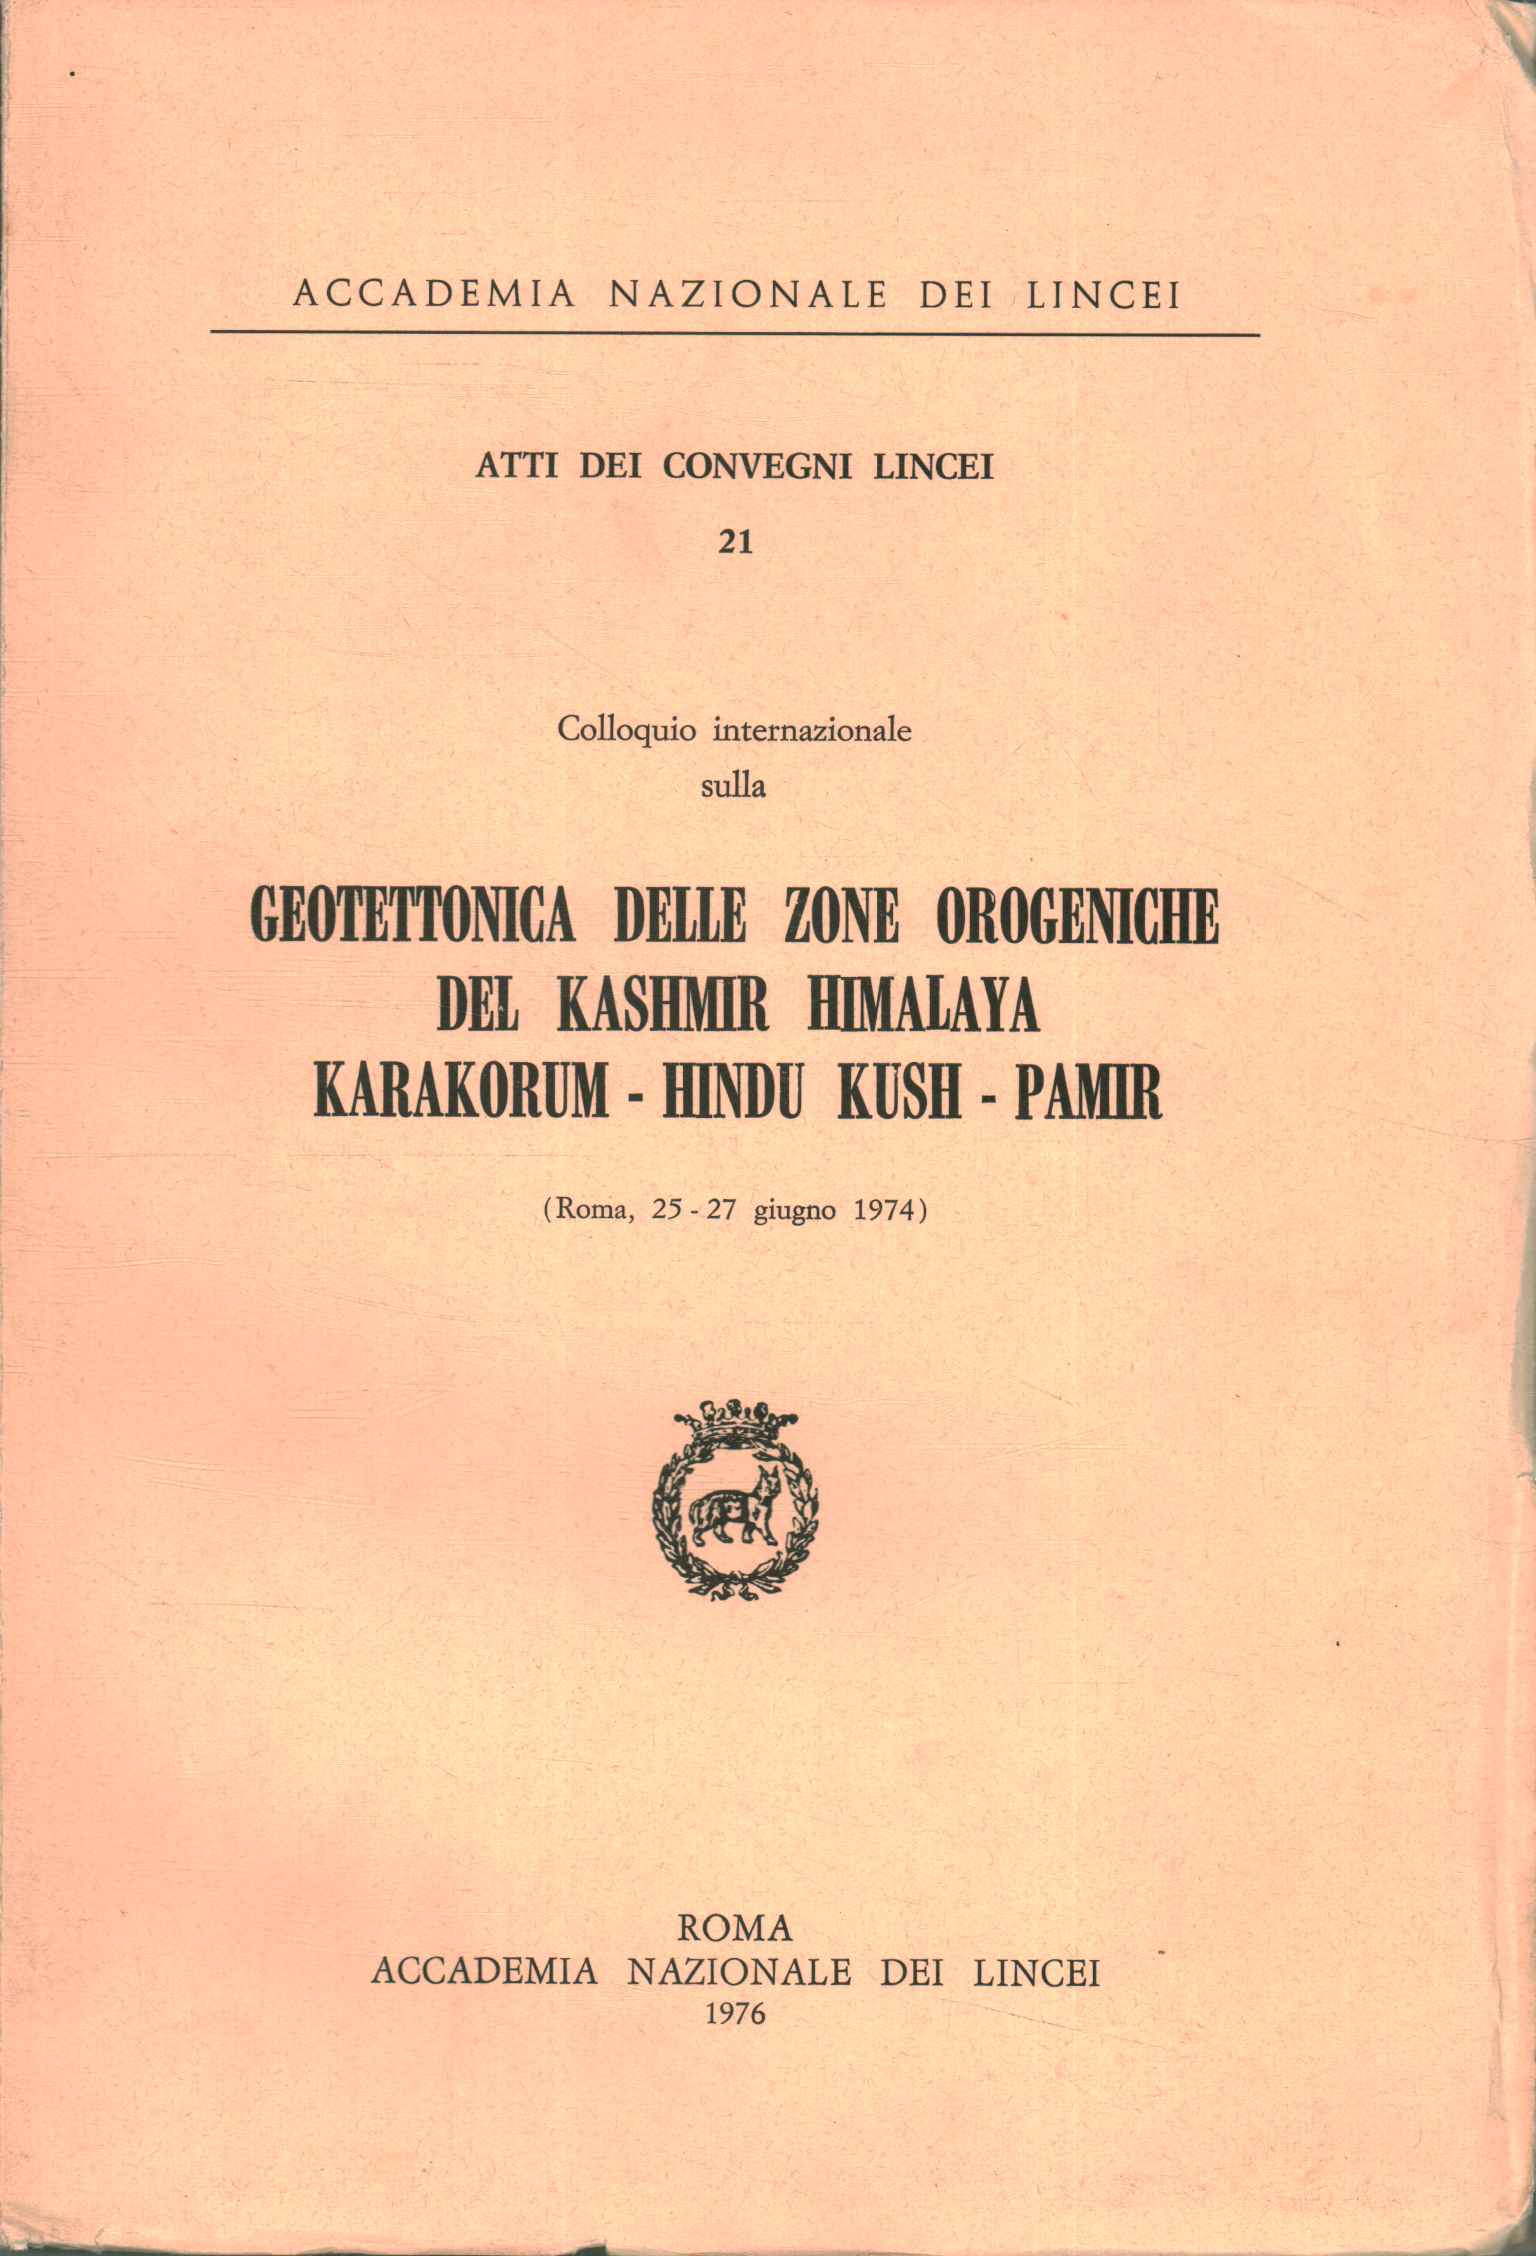 Geotectonics of the orogenic zones of the K